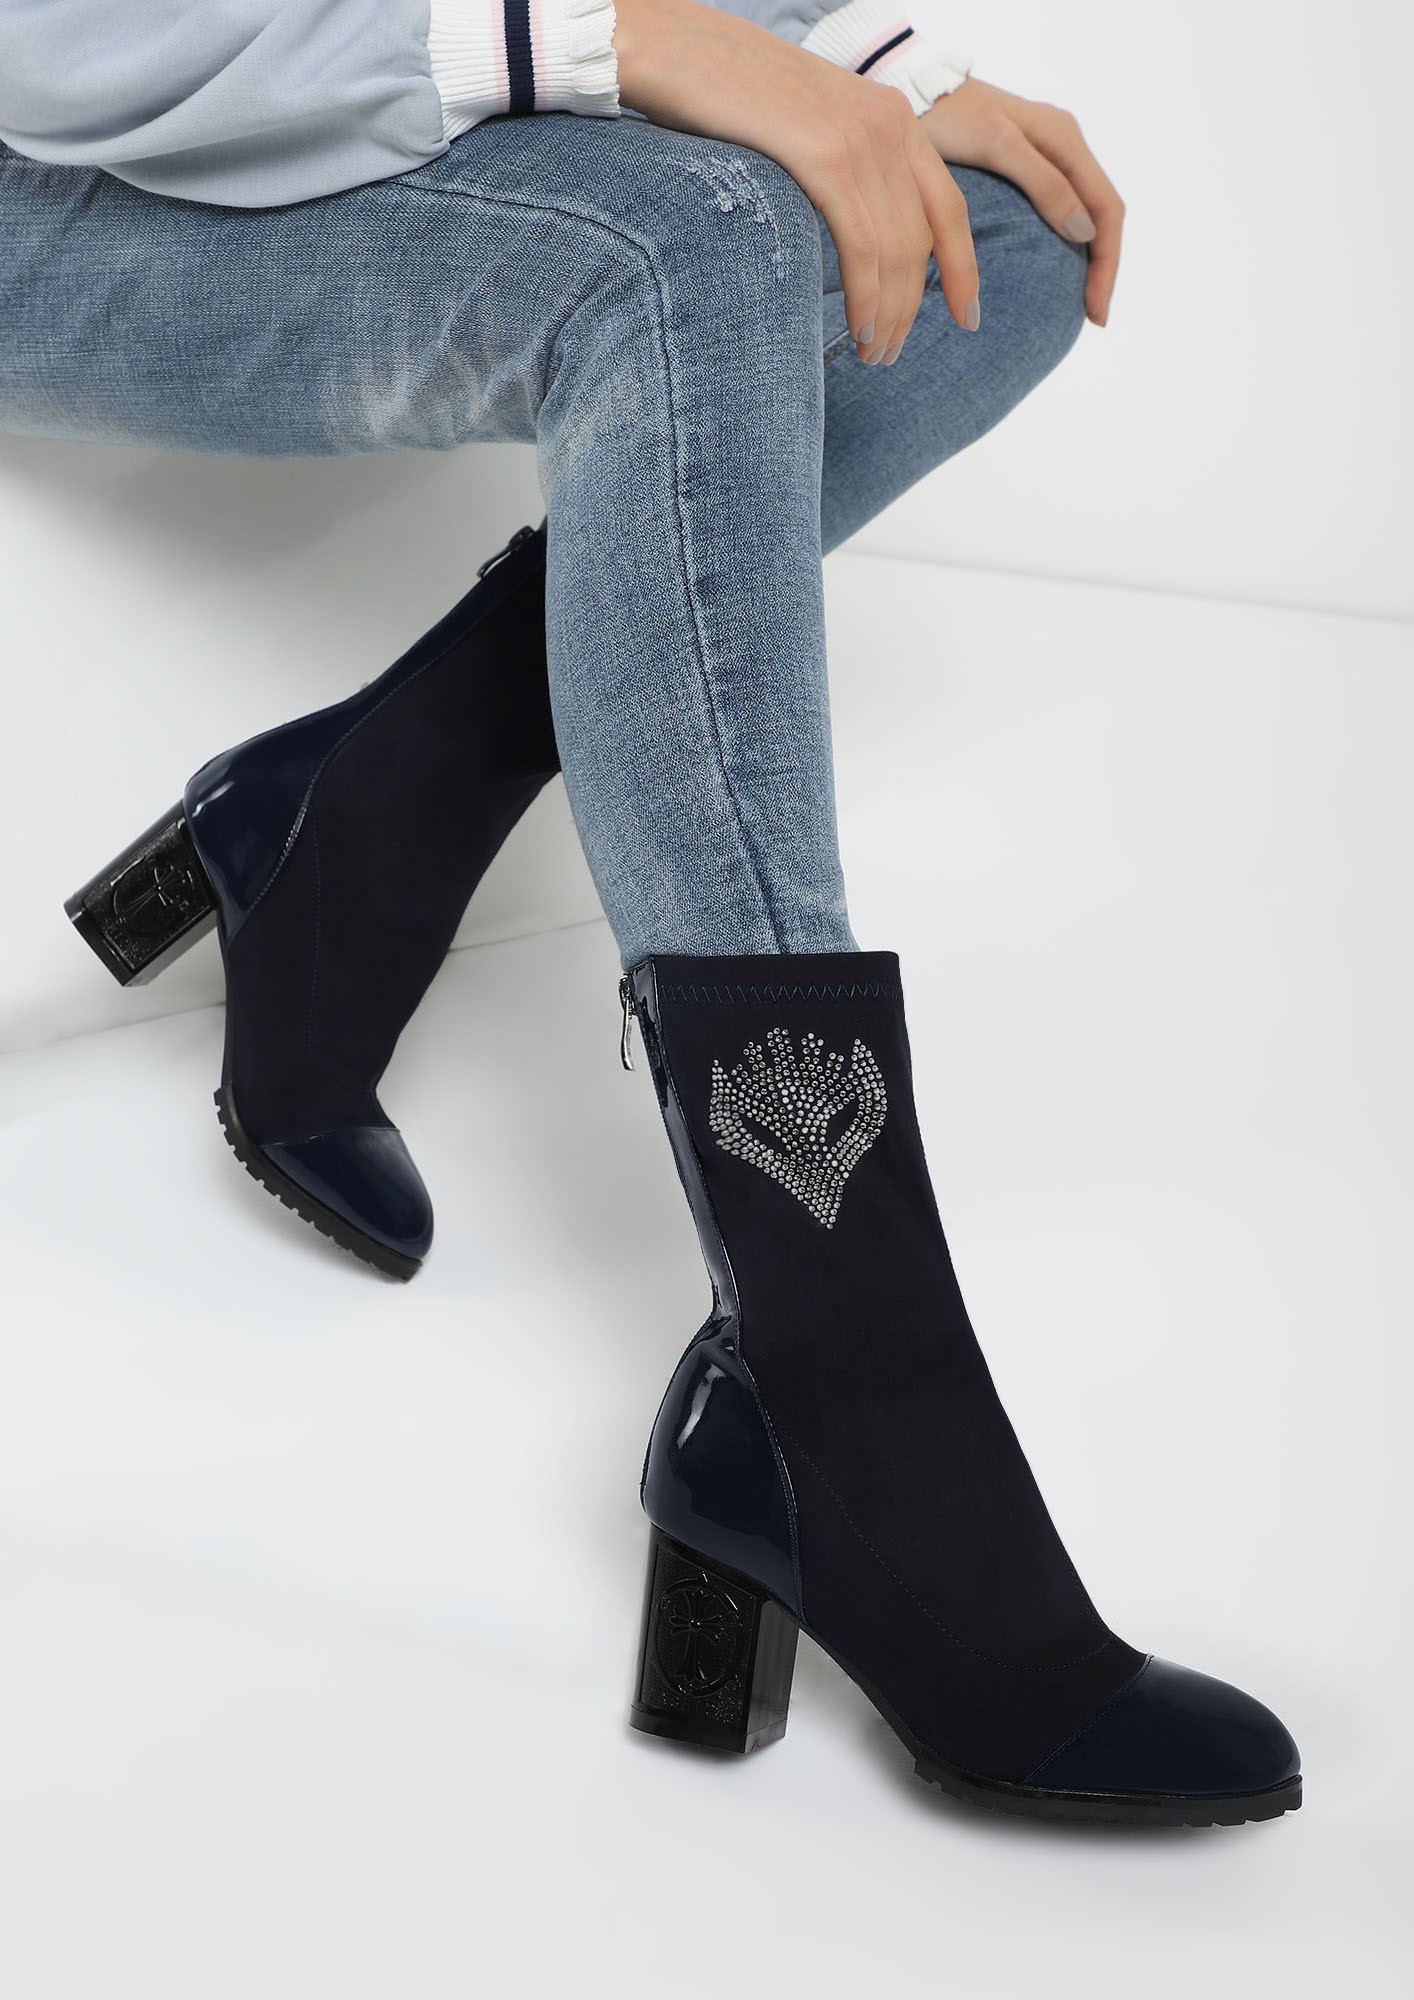 BEHIND THE MASK NAVY MID CALF BOOTS